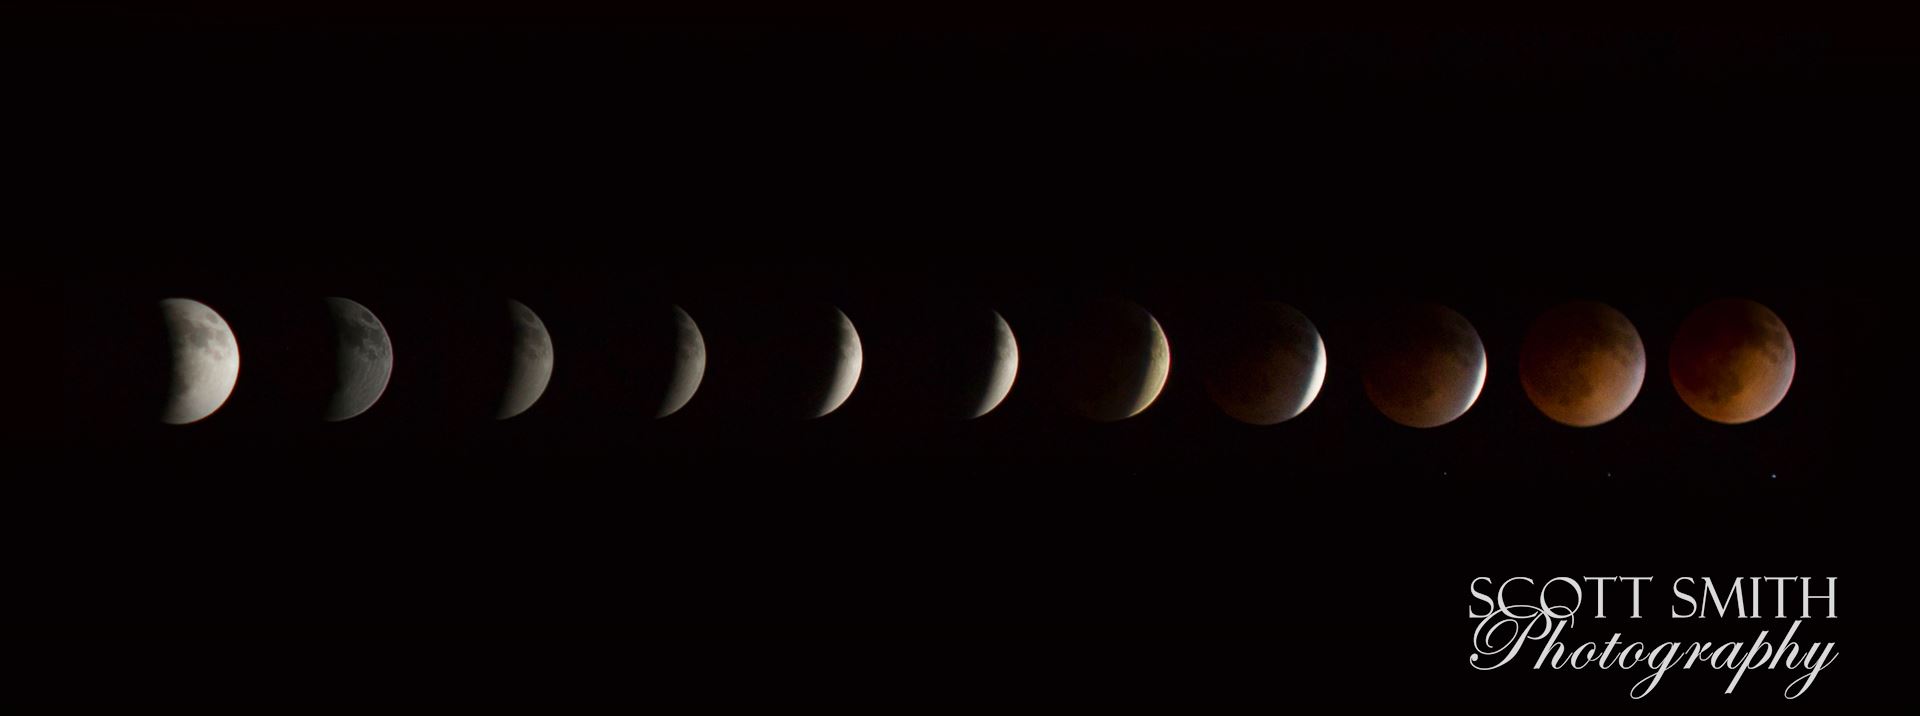 2014 Blood Moon Collage Lunar eclipse and blood moon, 4/15/2014.  Shot as separate frames with a 100mm Canon f/2.8 and assembled in Photoshop. by Scott Smith Photos